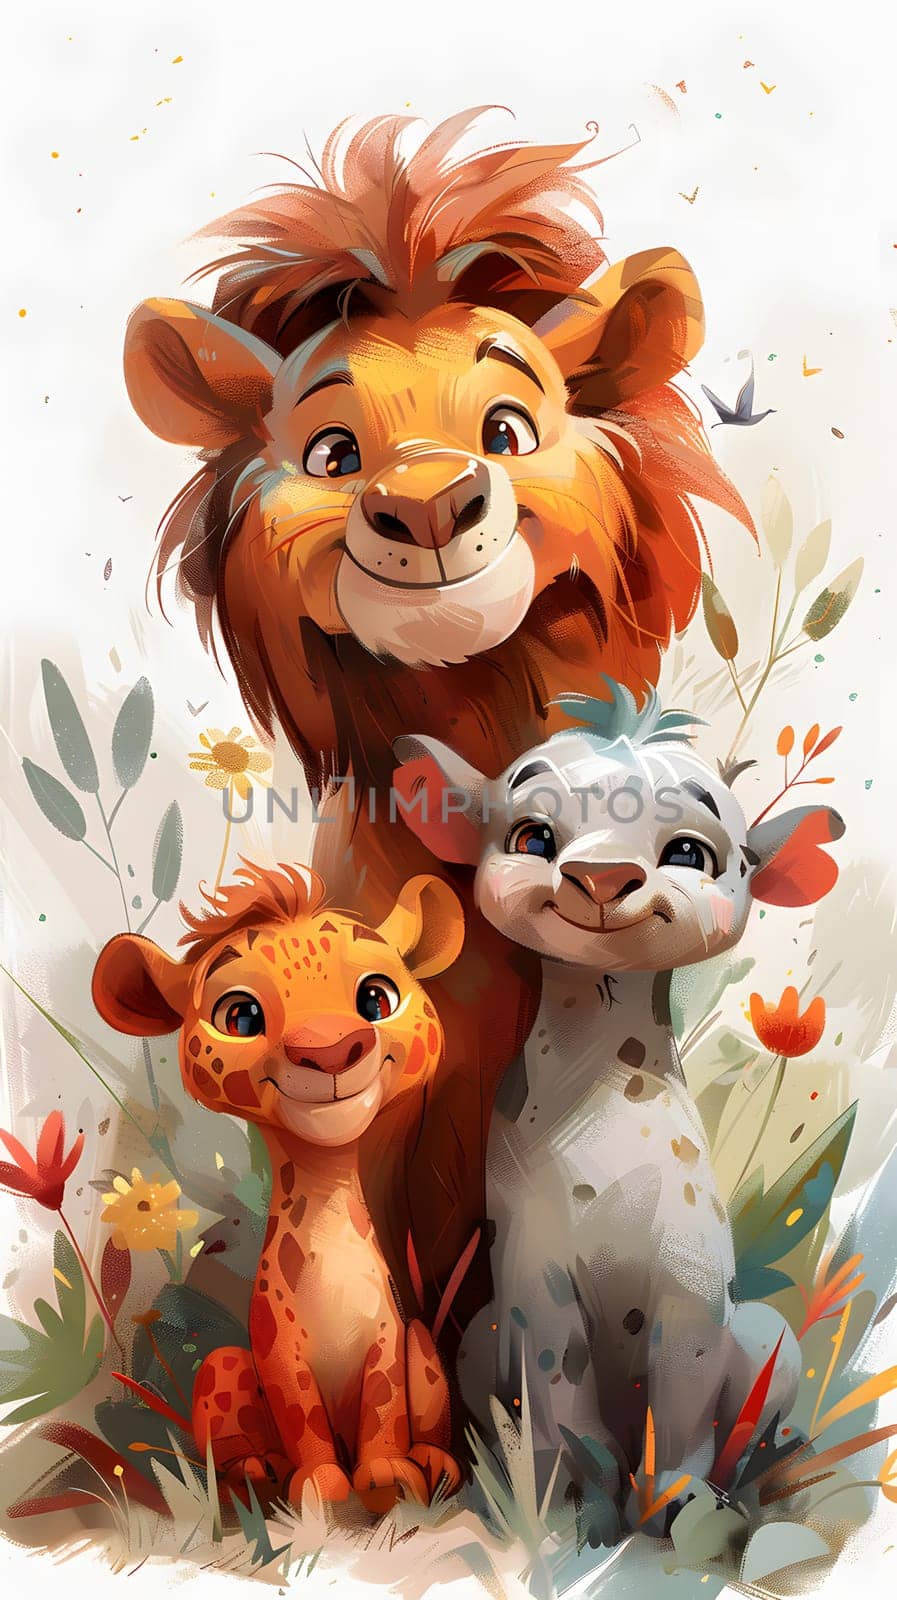 Art of a lion, giraffe, and baby lion toy, happy vertebrates with fur and snout by Nadtochiy